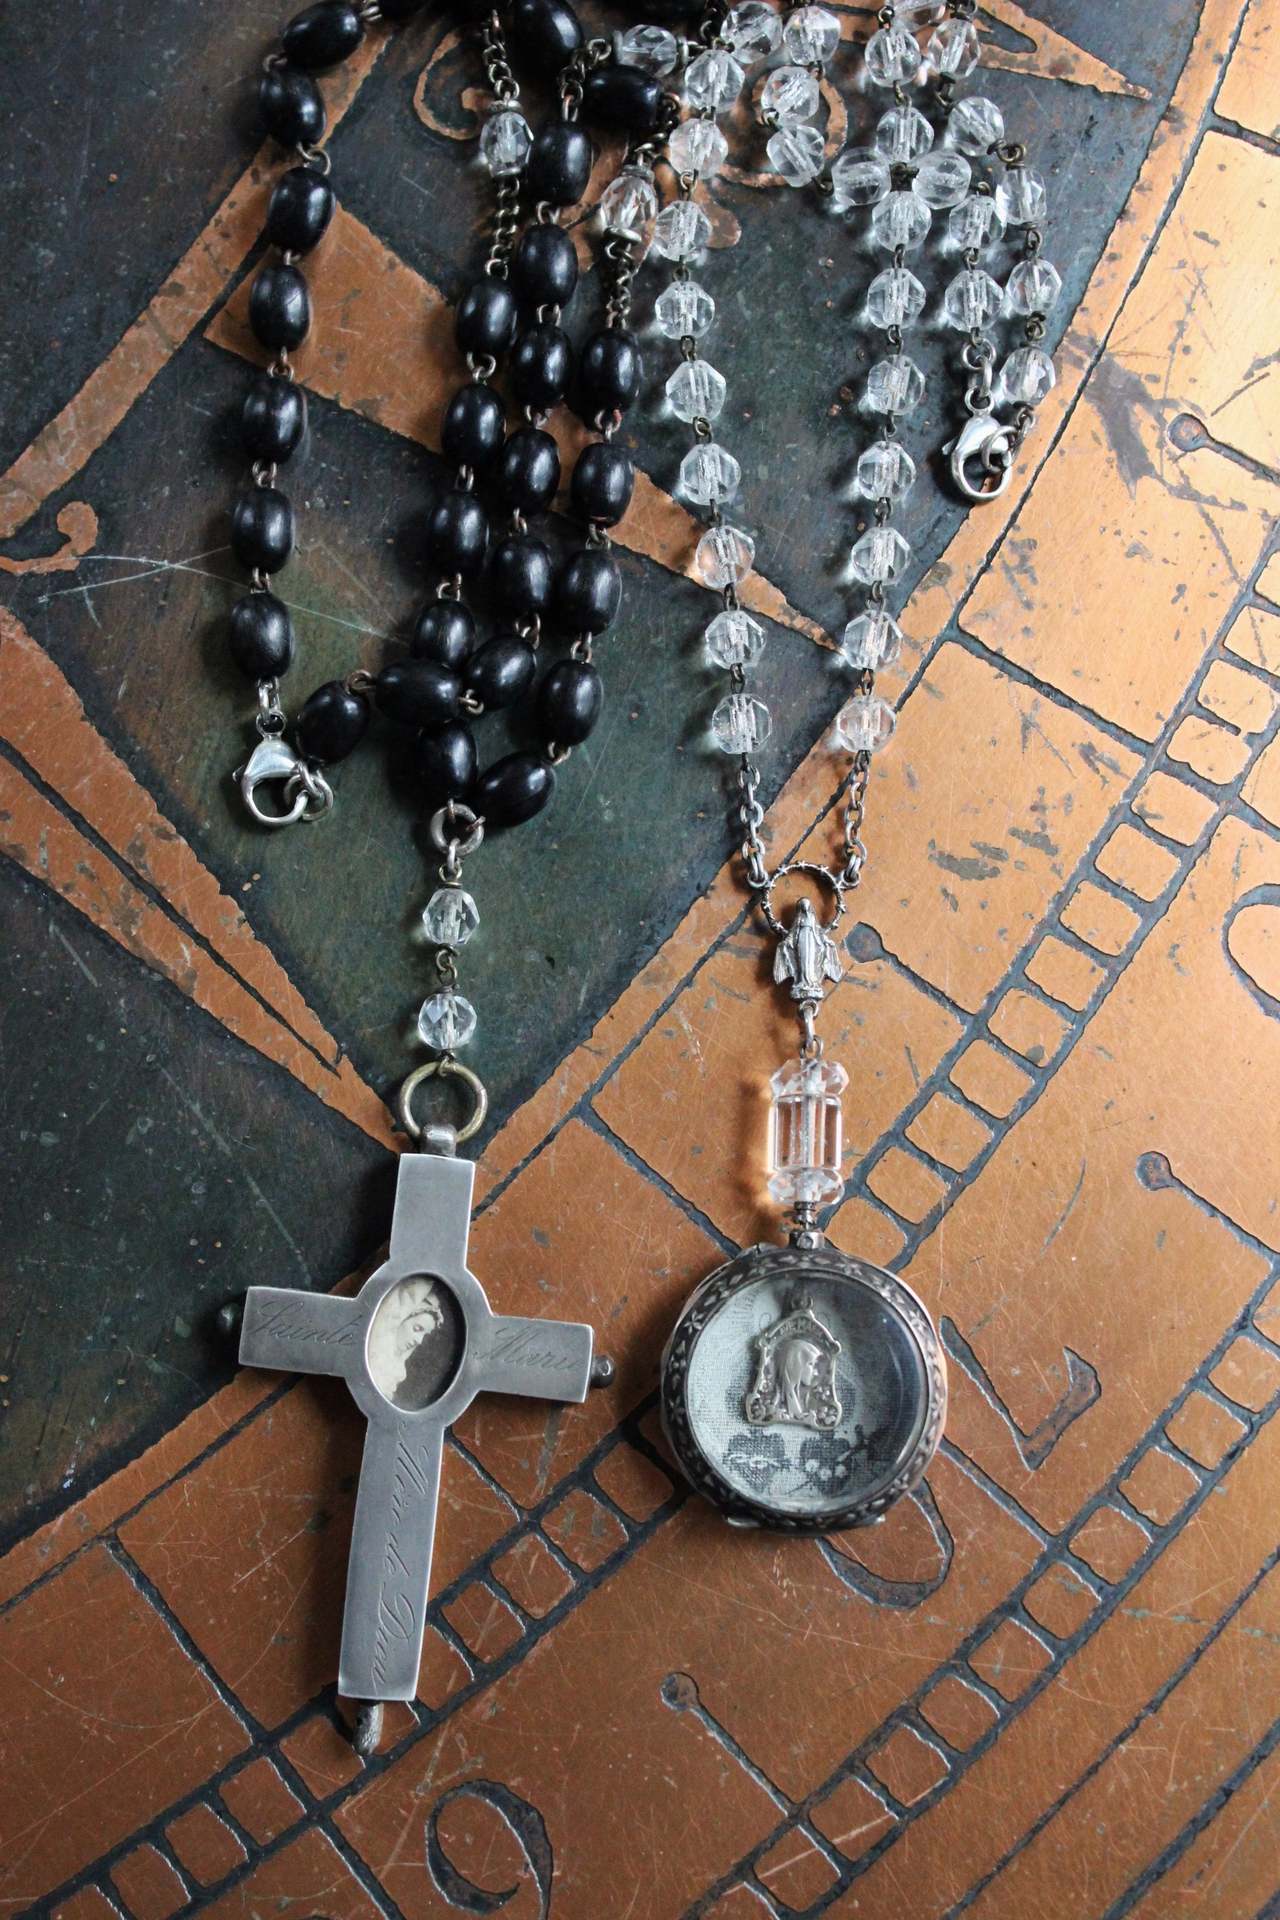 The Most Precious Light Necklace Set w/RARE Antique 19th Century French Engraved Sterling Reliquary Cross, Antique Sterling Pocket Watch Locket, Antique French Rosary Bead Chains